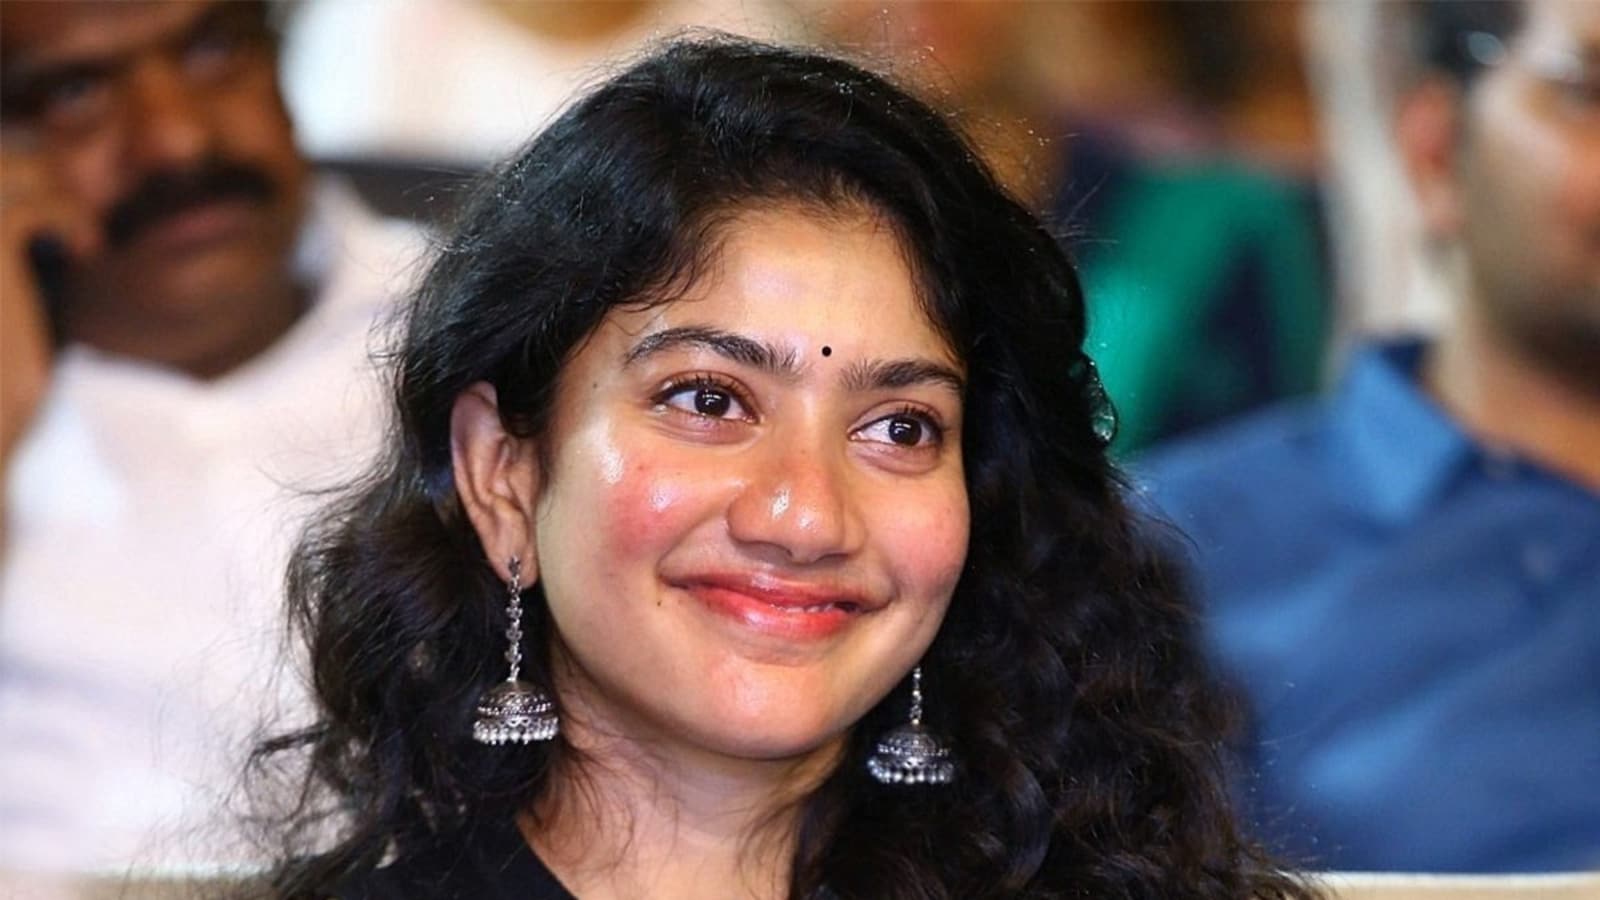 Sai Pallavi says her father jokes about her marrying a Telugu guy: ‘I am not ready yet’